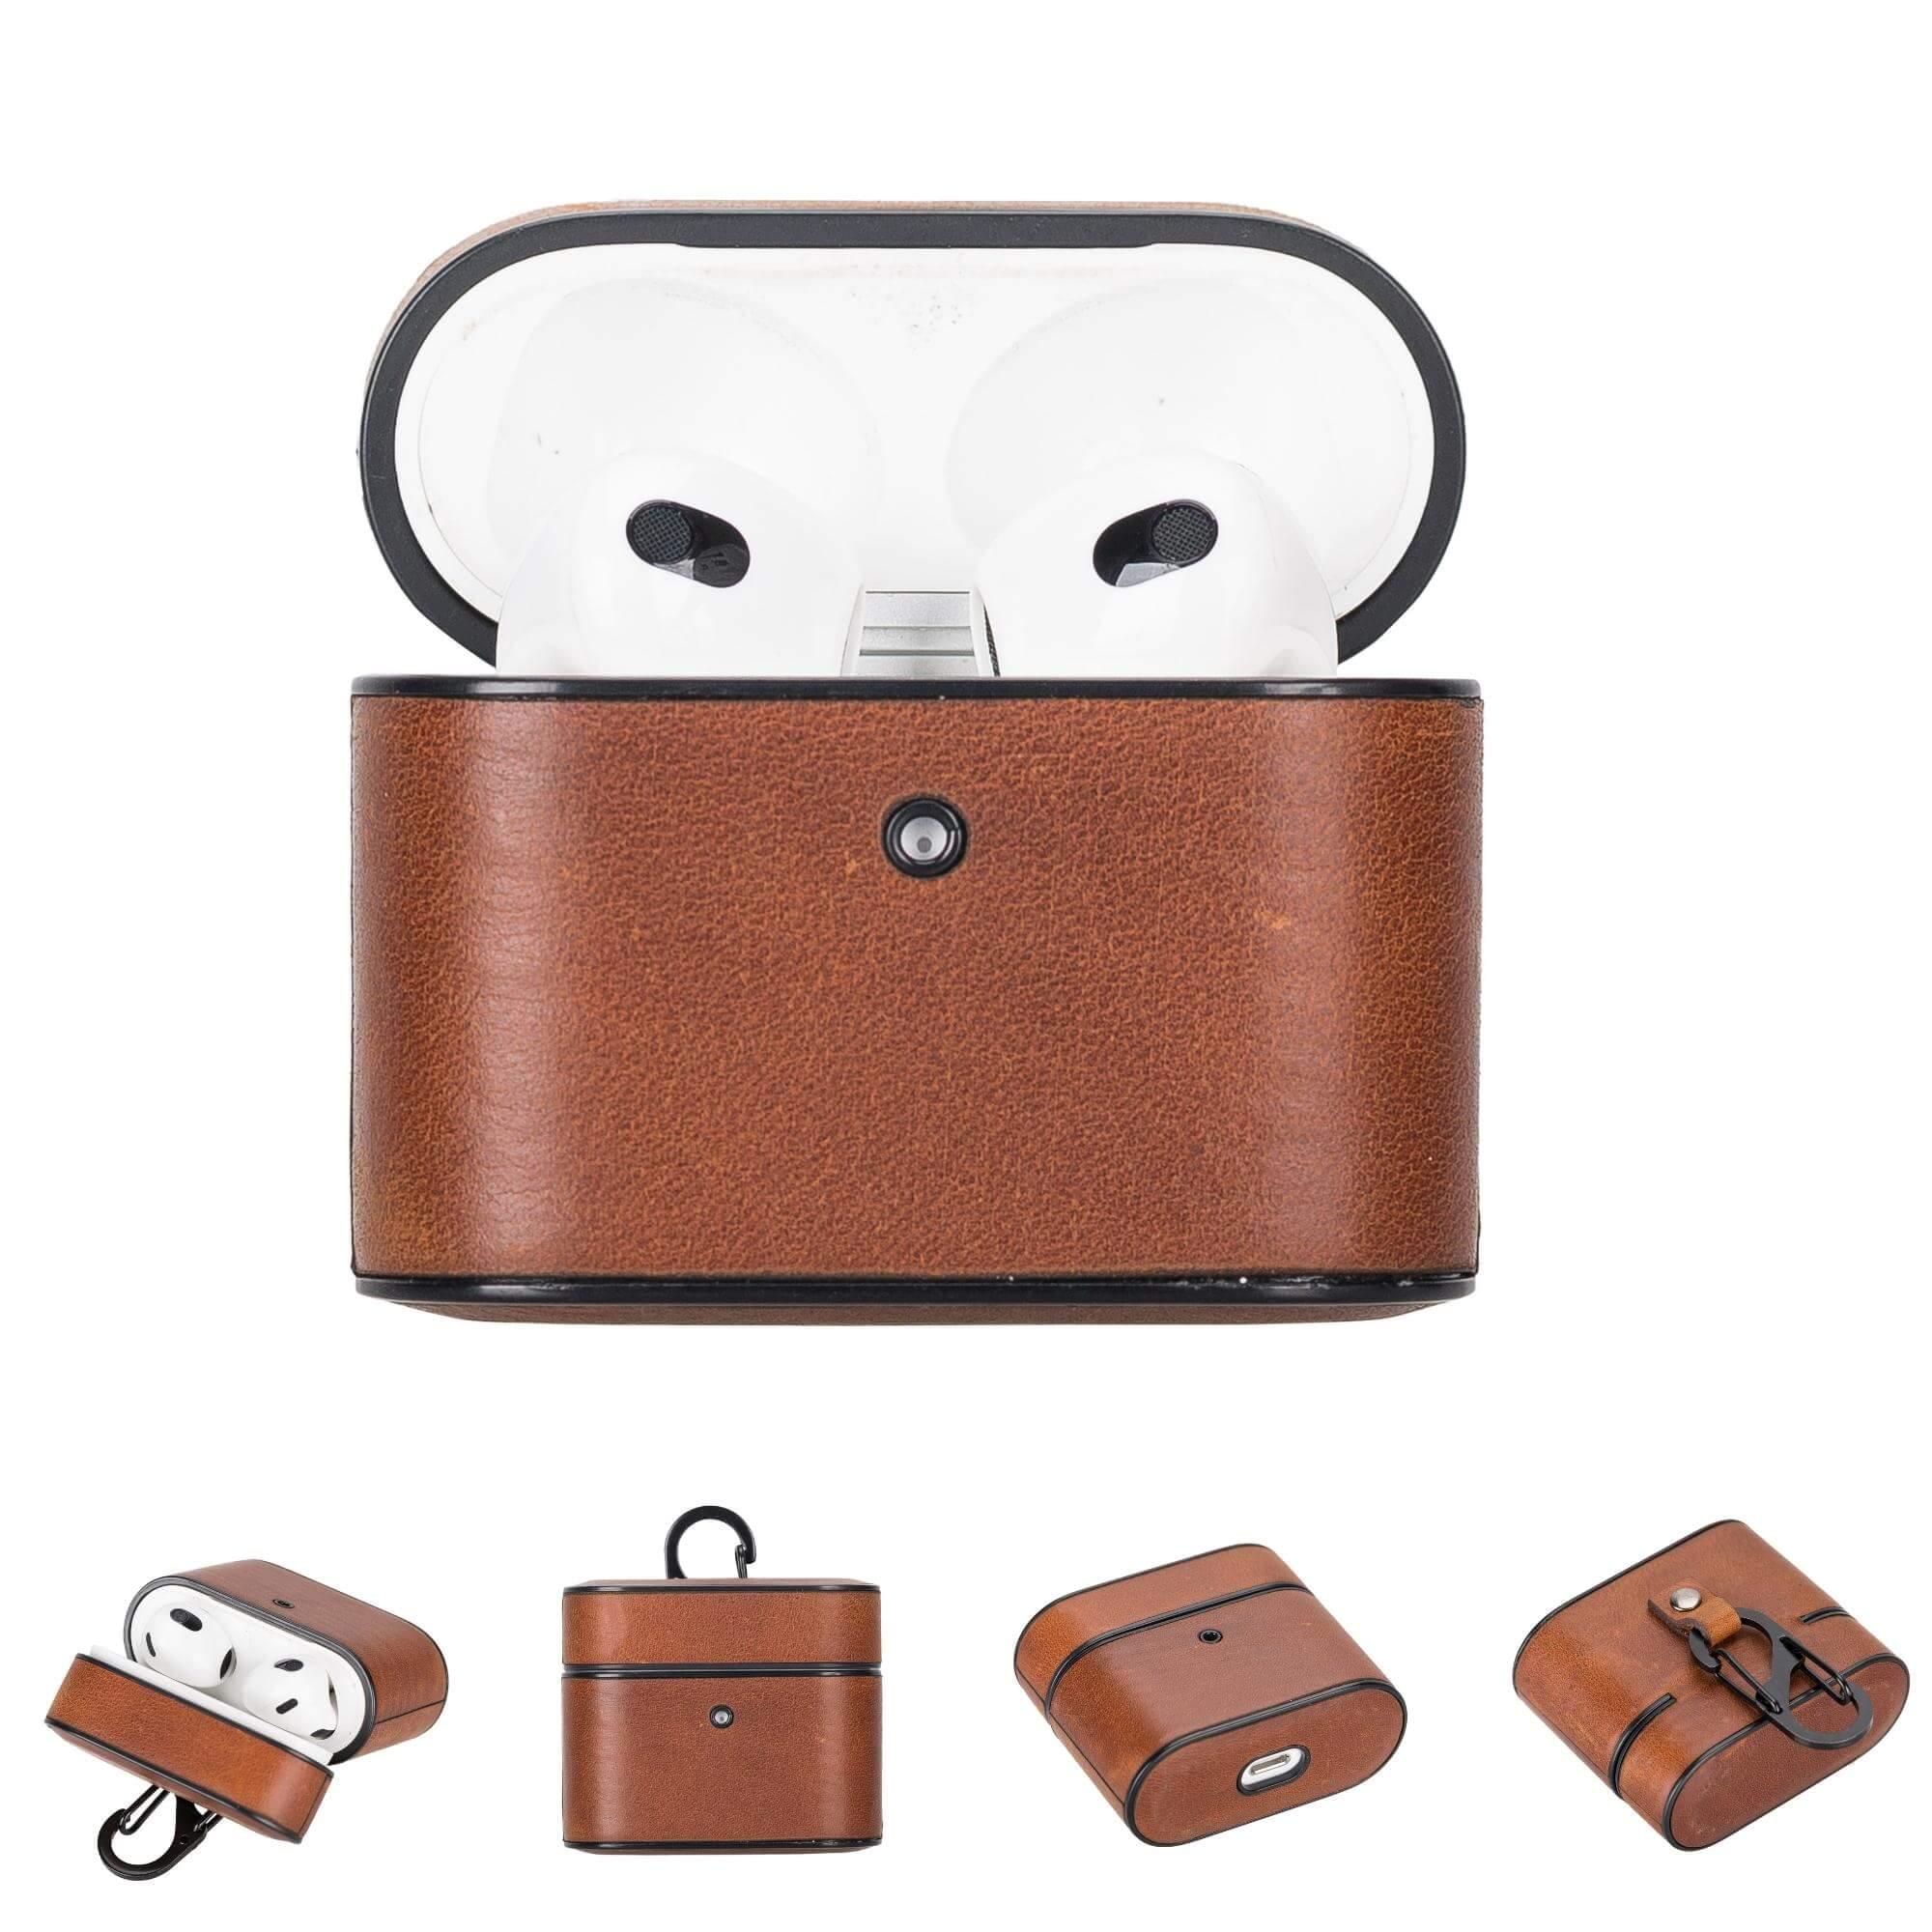 Twelve South AirSnap AirPods Leather Case, Cognac